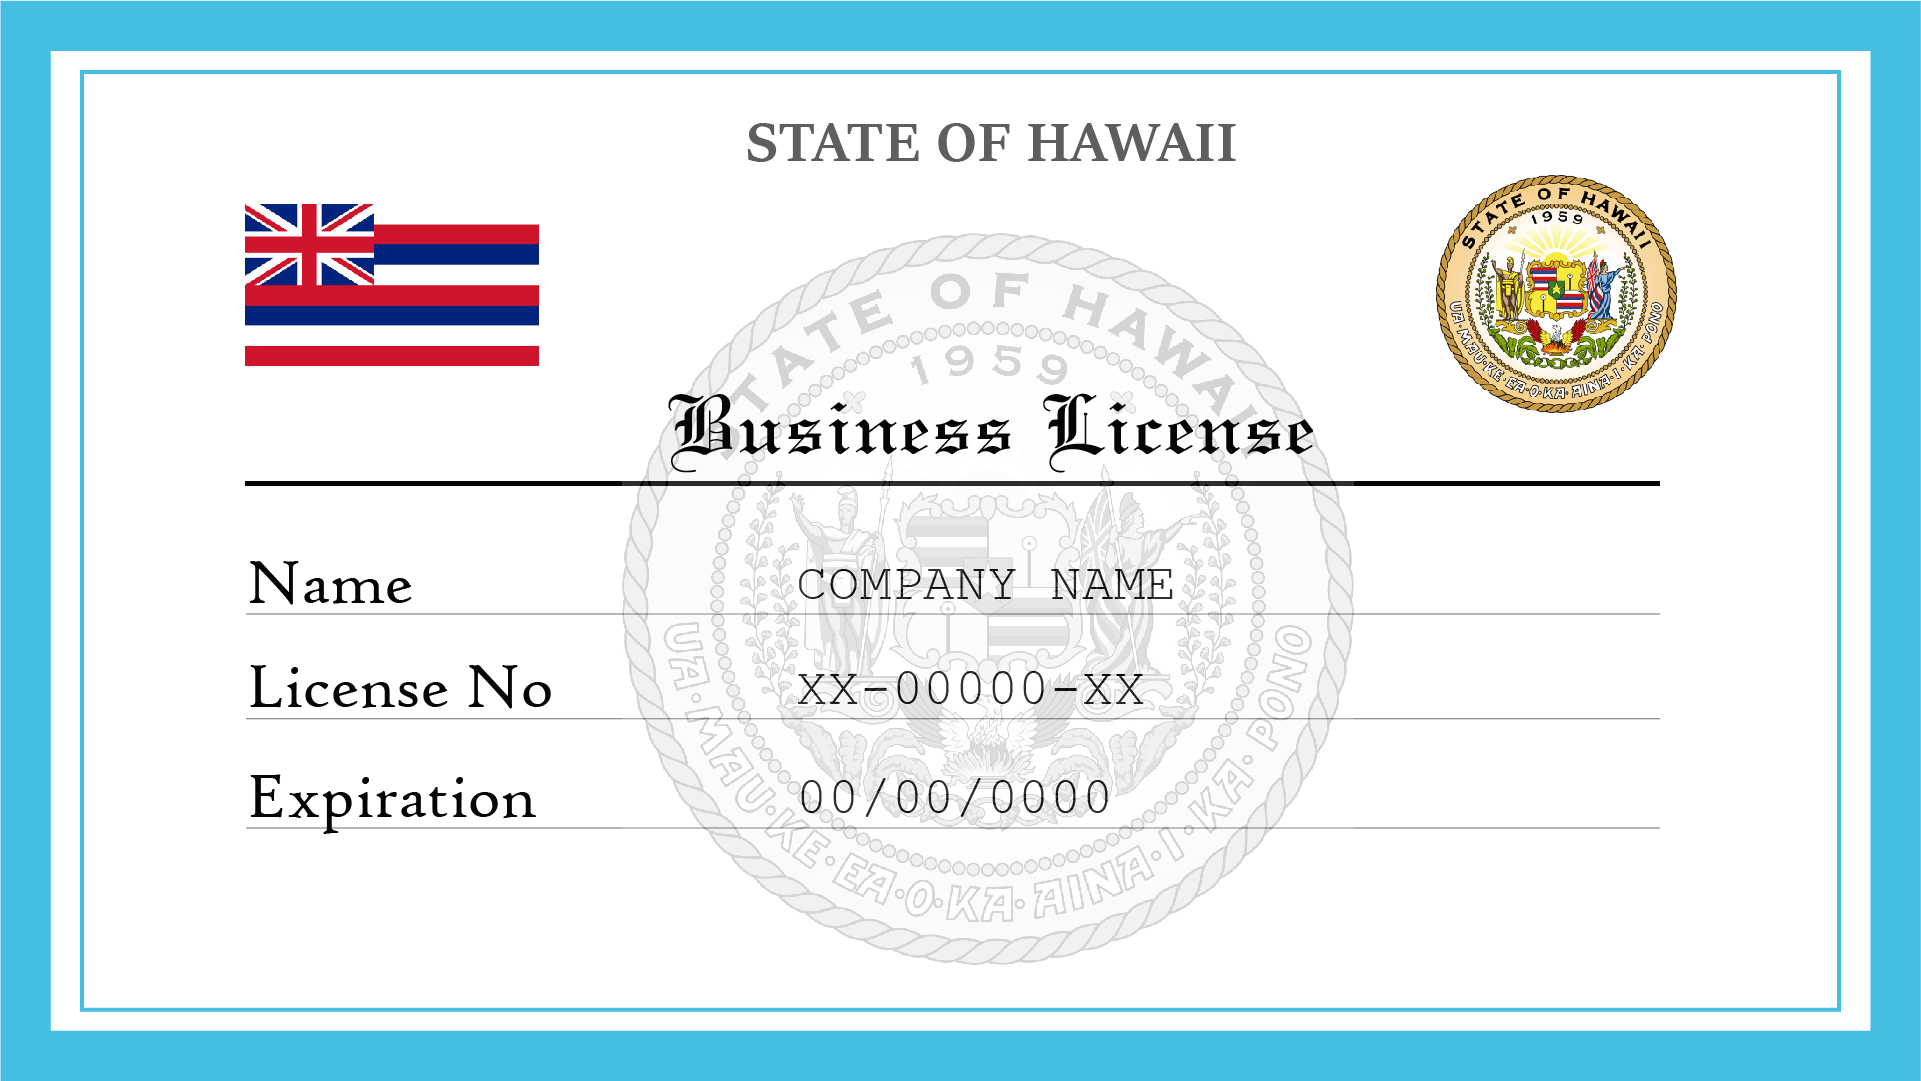 How To Get A Wedding Officiant License In Hawaii